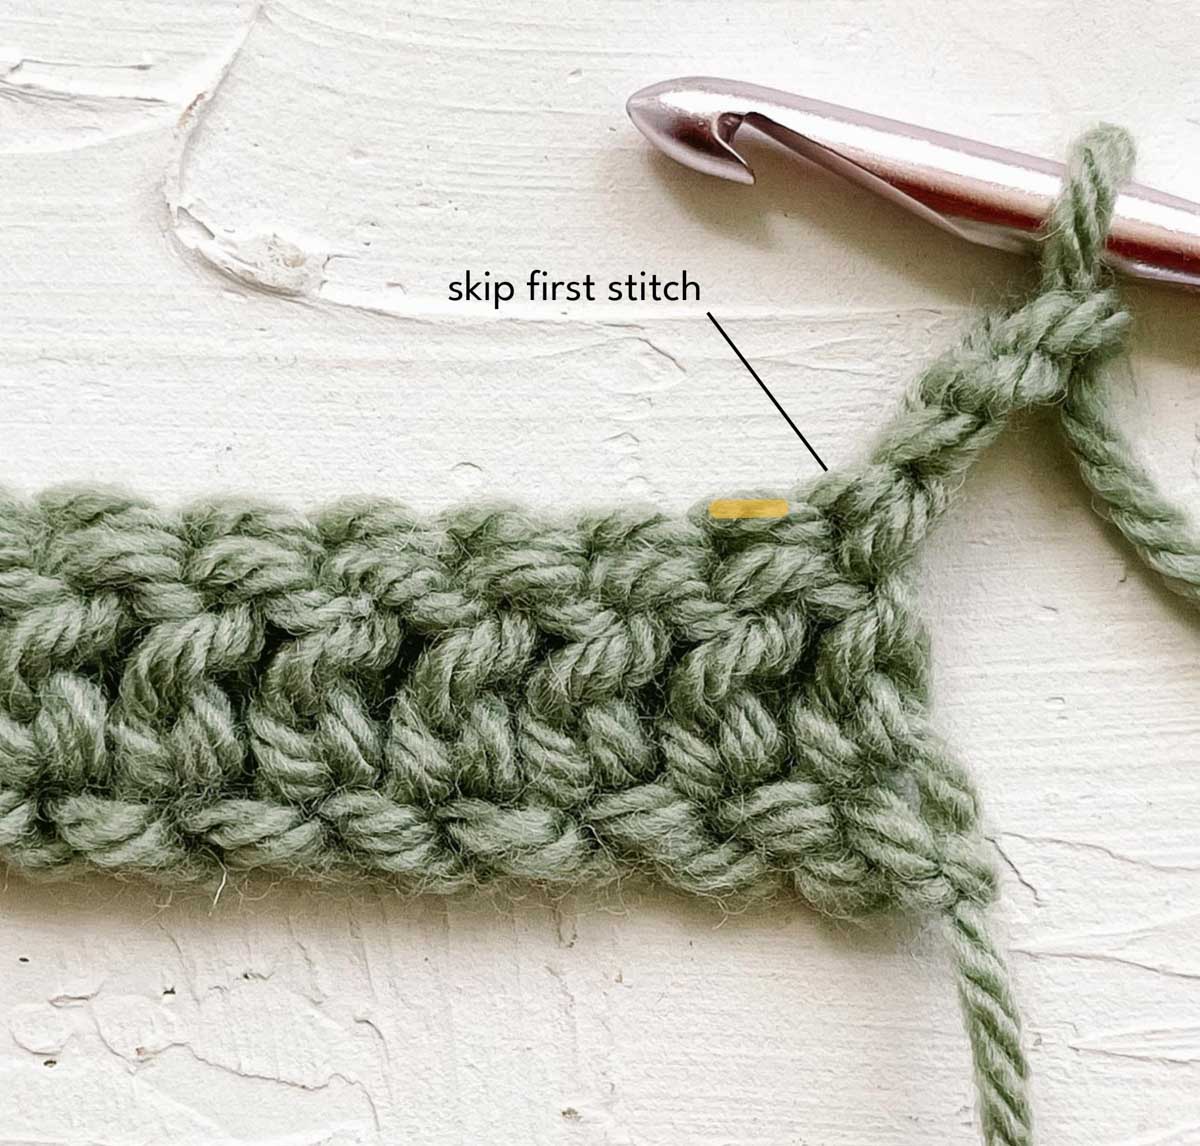 Diagram showing where to start a row of double crochet stitches after the turning chain.